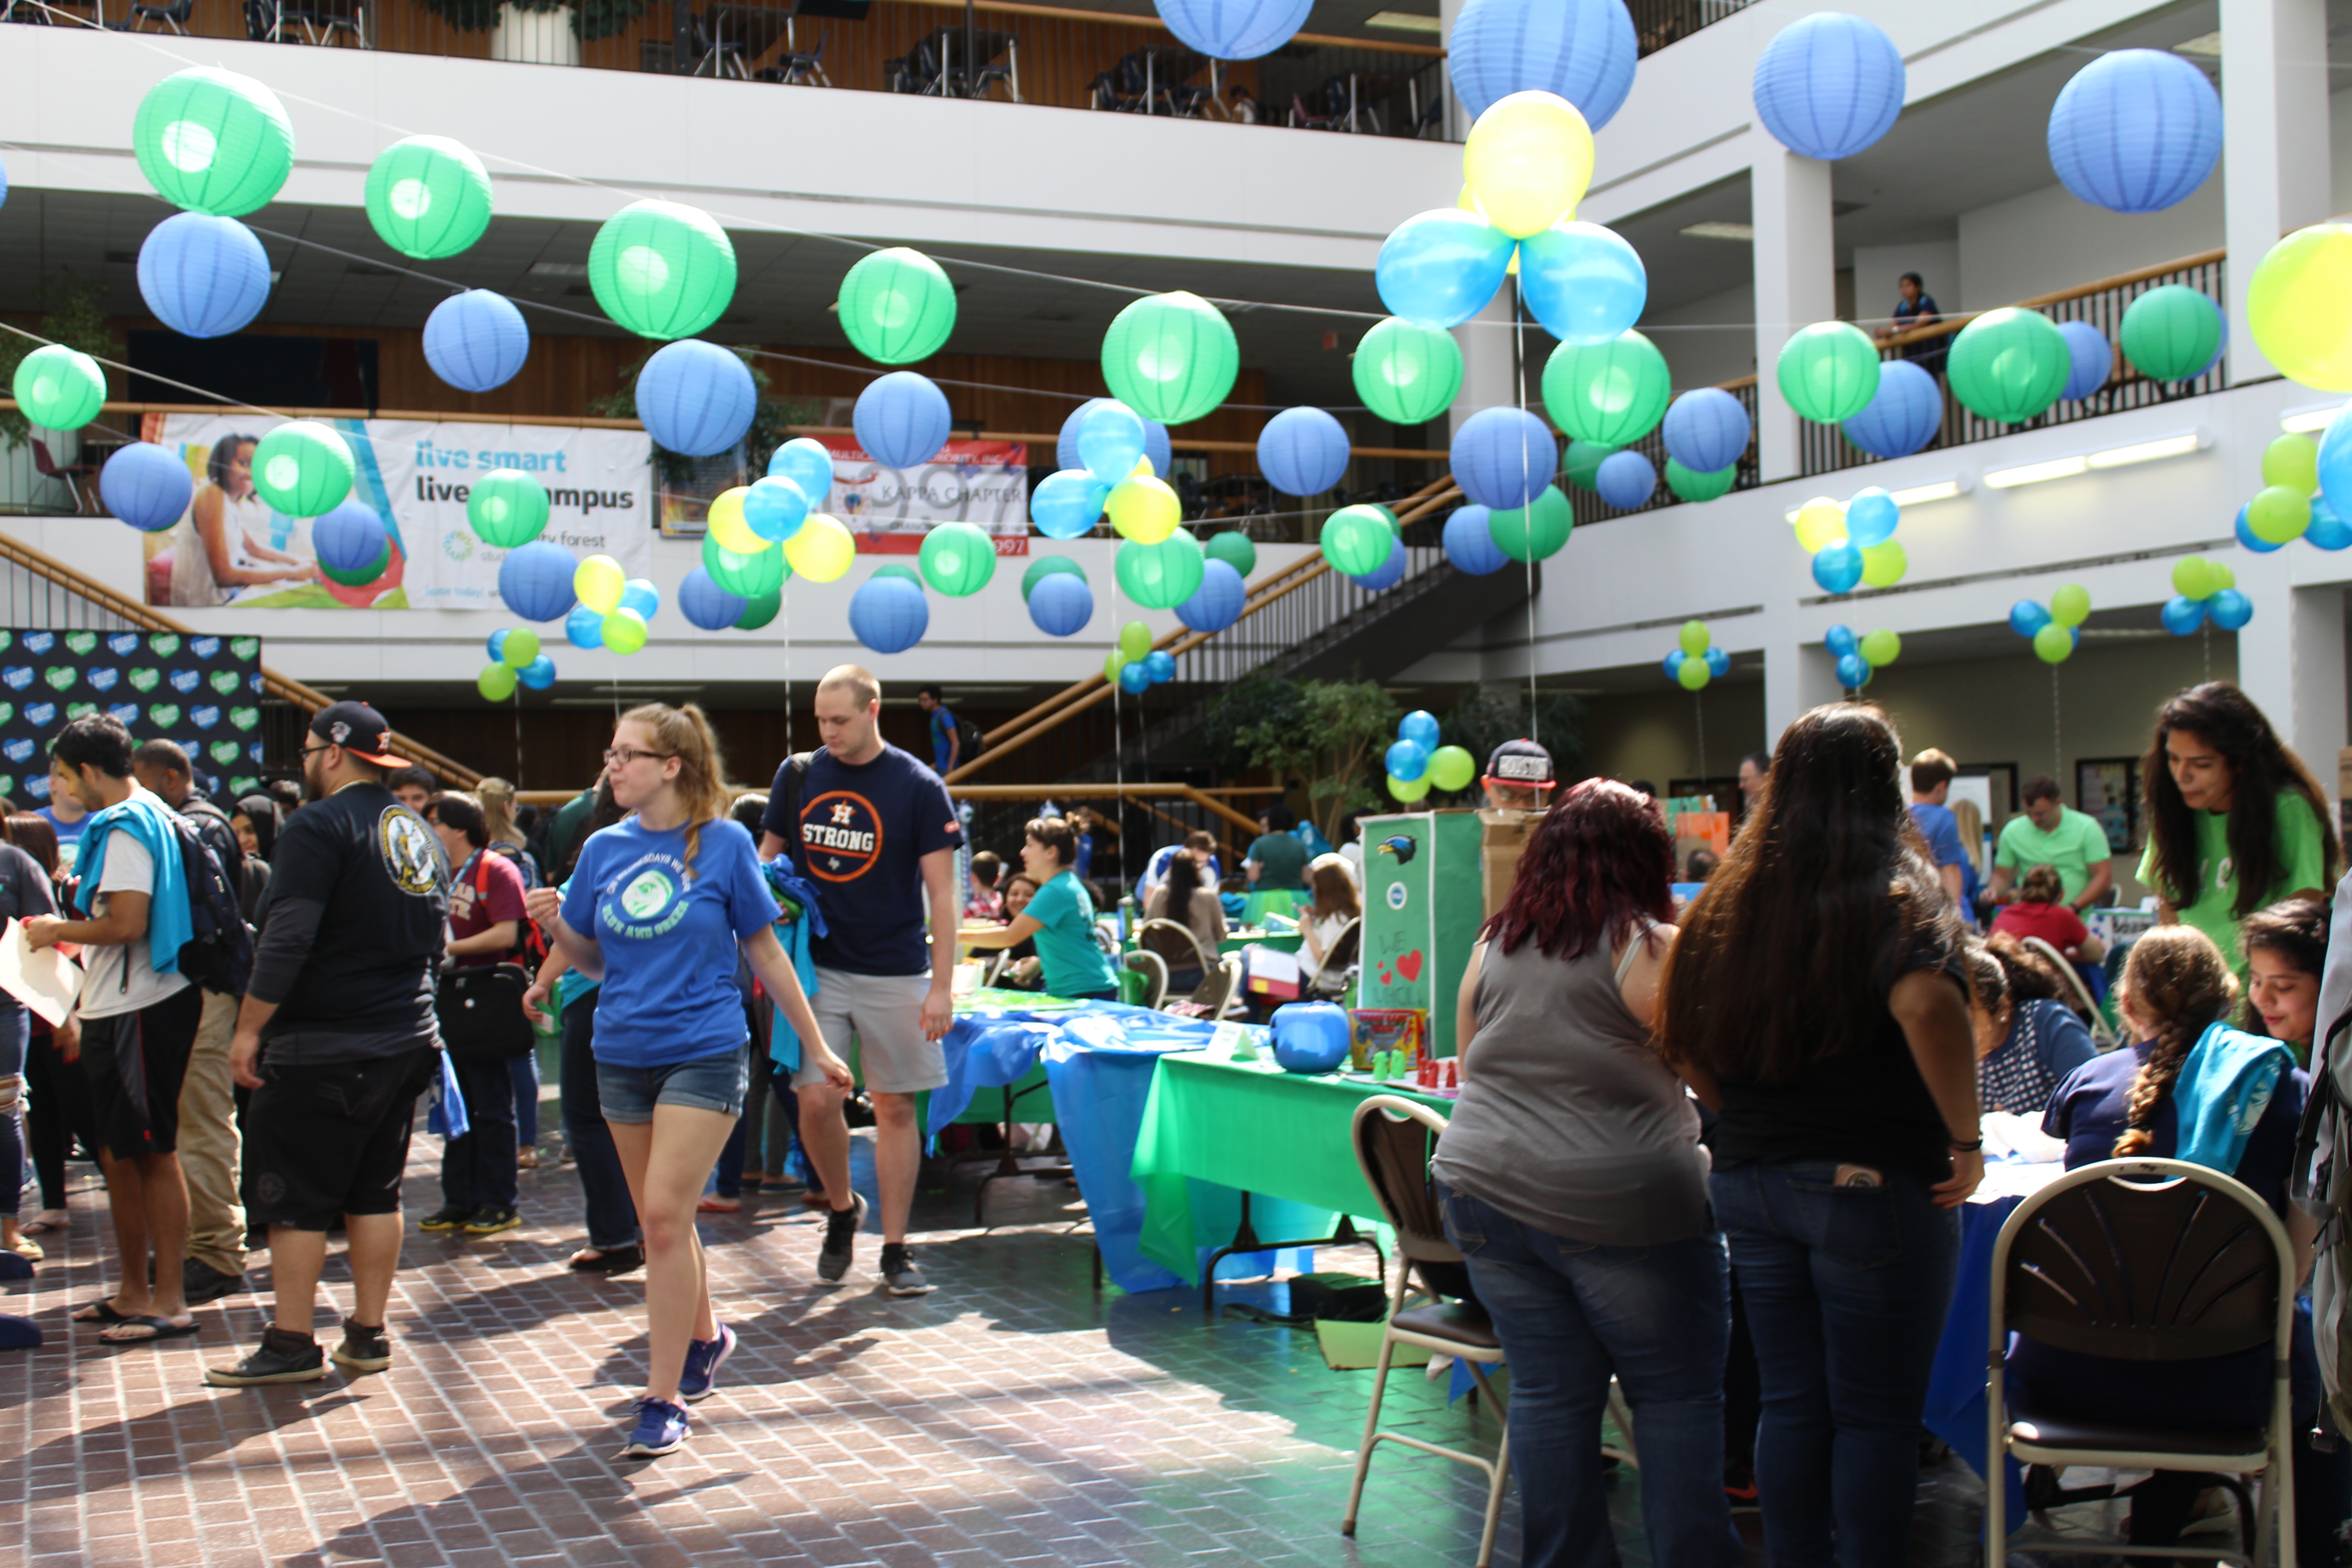 PHOTO: I Heart UHCL day was held on Oct. 17 in Atrium II.hoto by: The Signal reporter Bianca Salazar